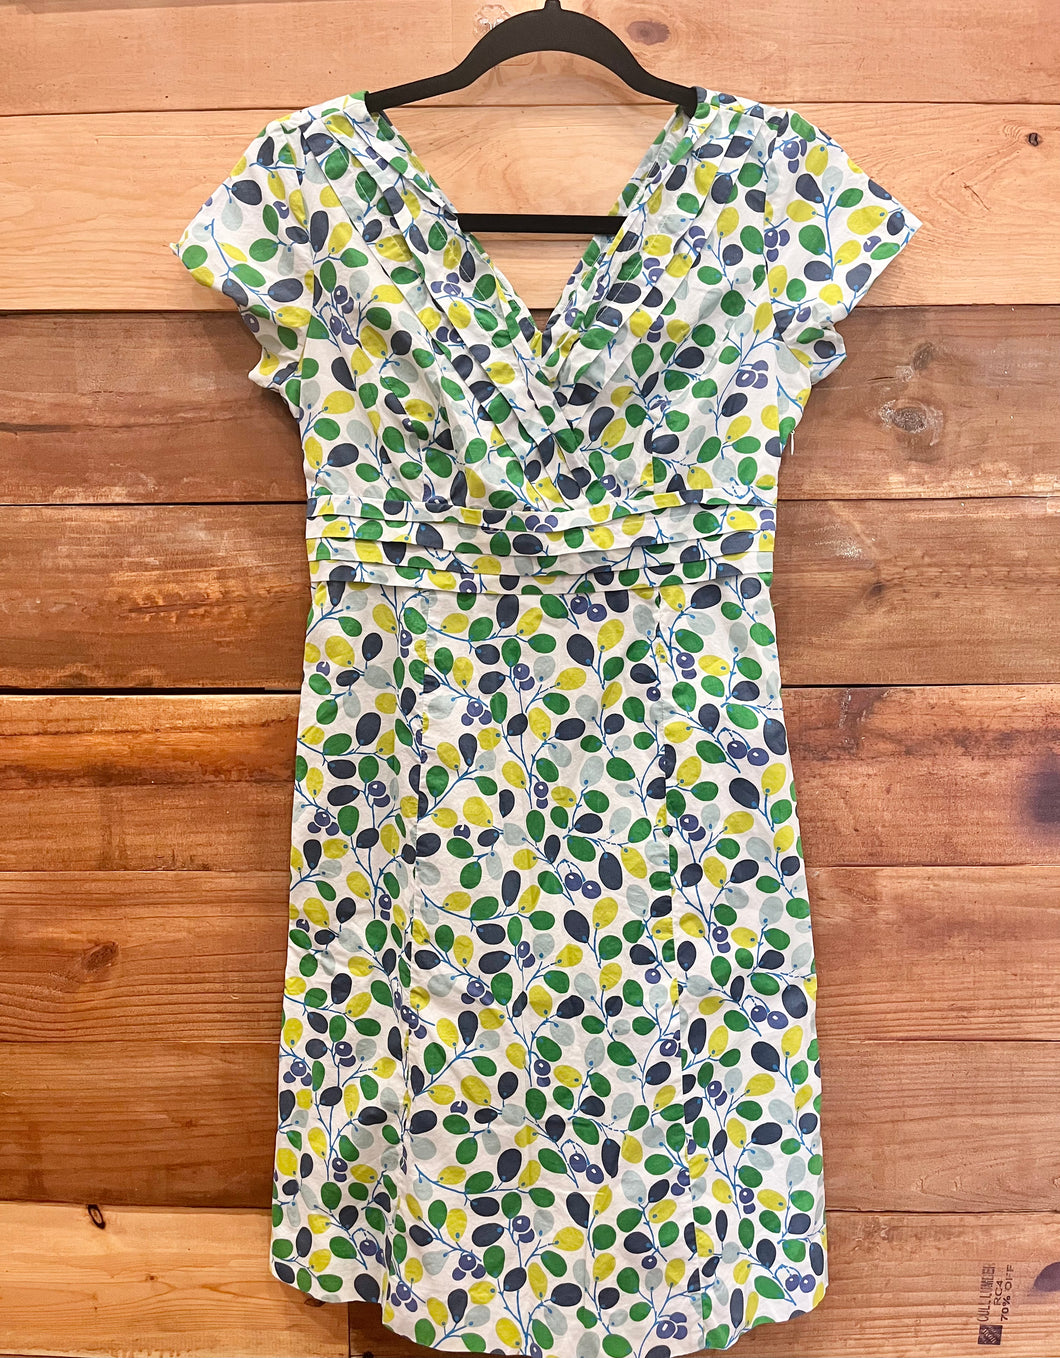 Boden Green Olive Dress Size 2P